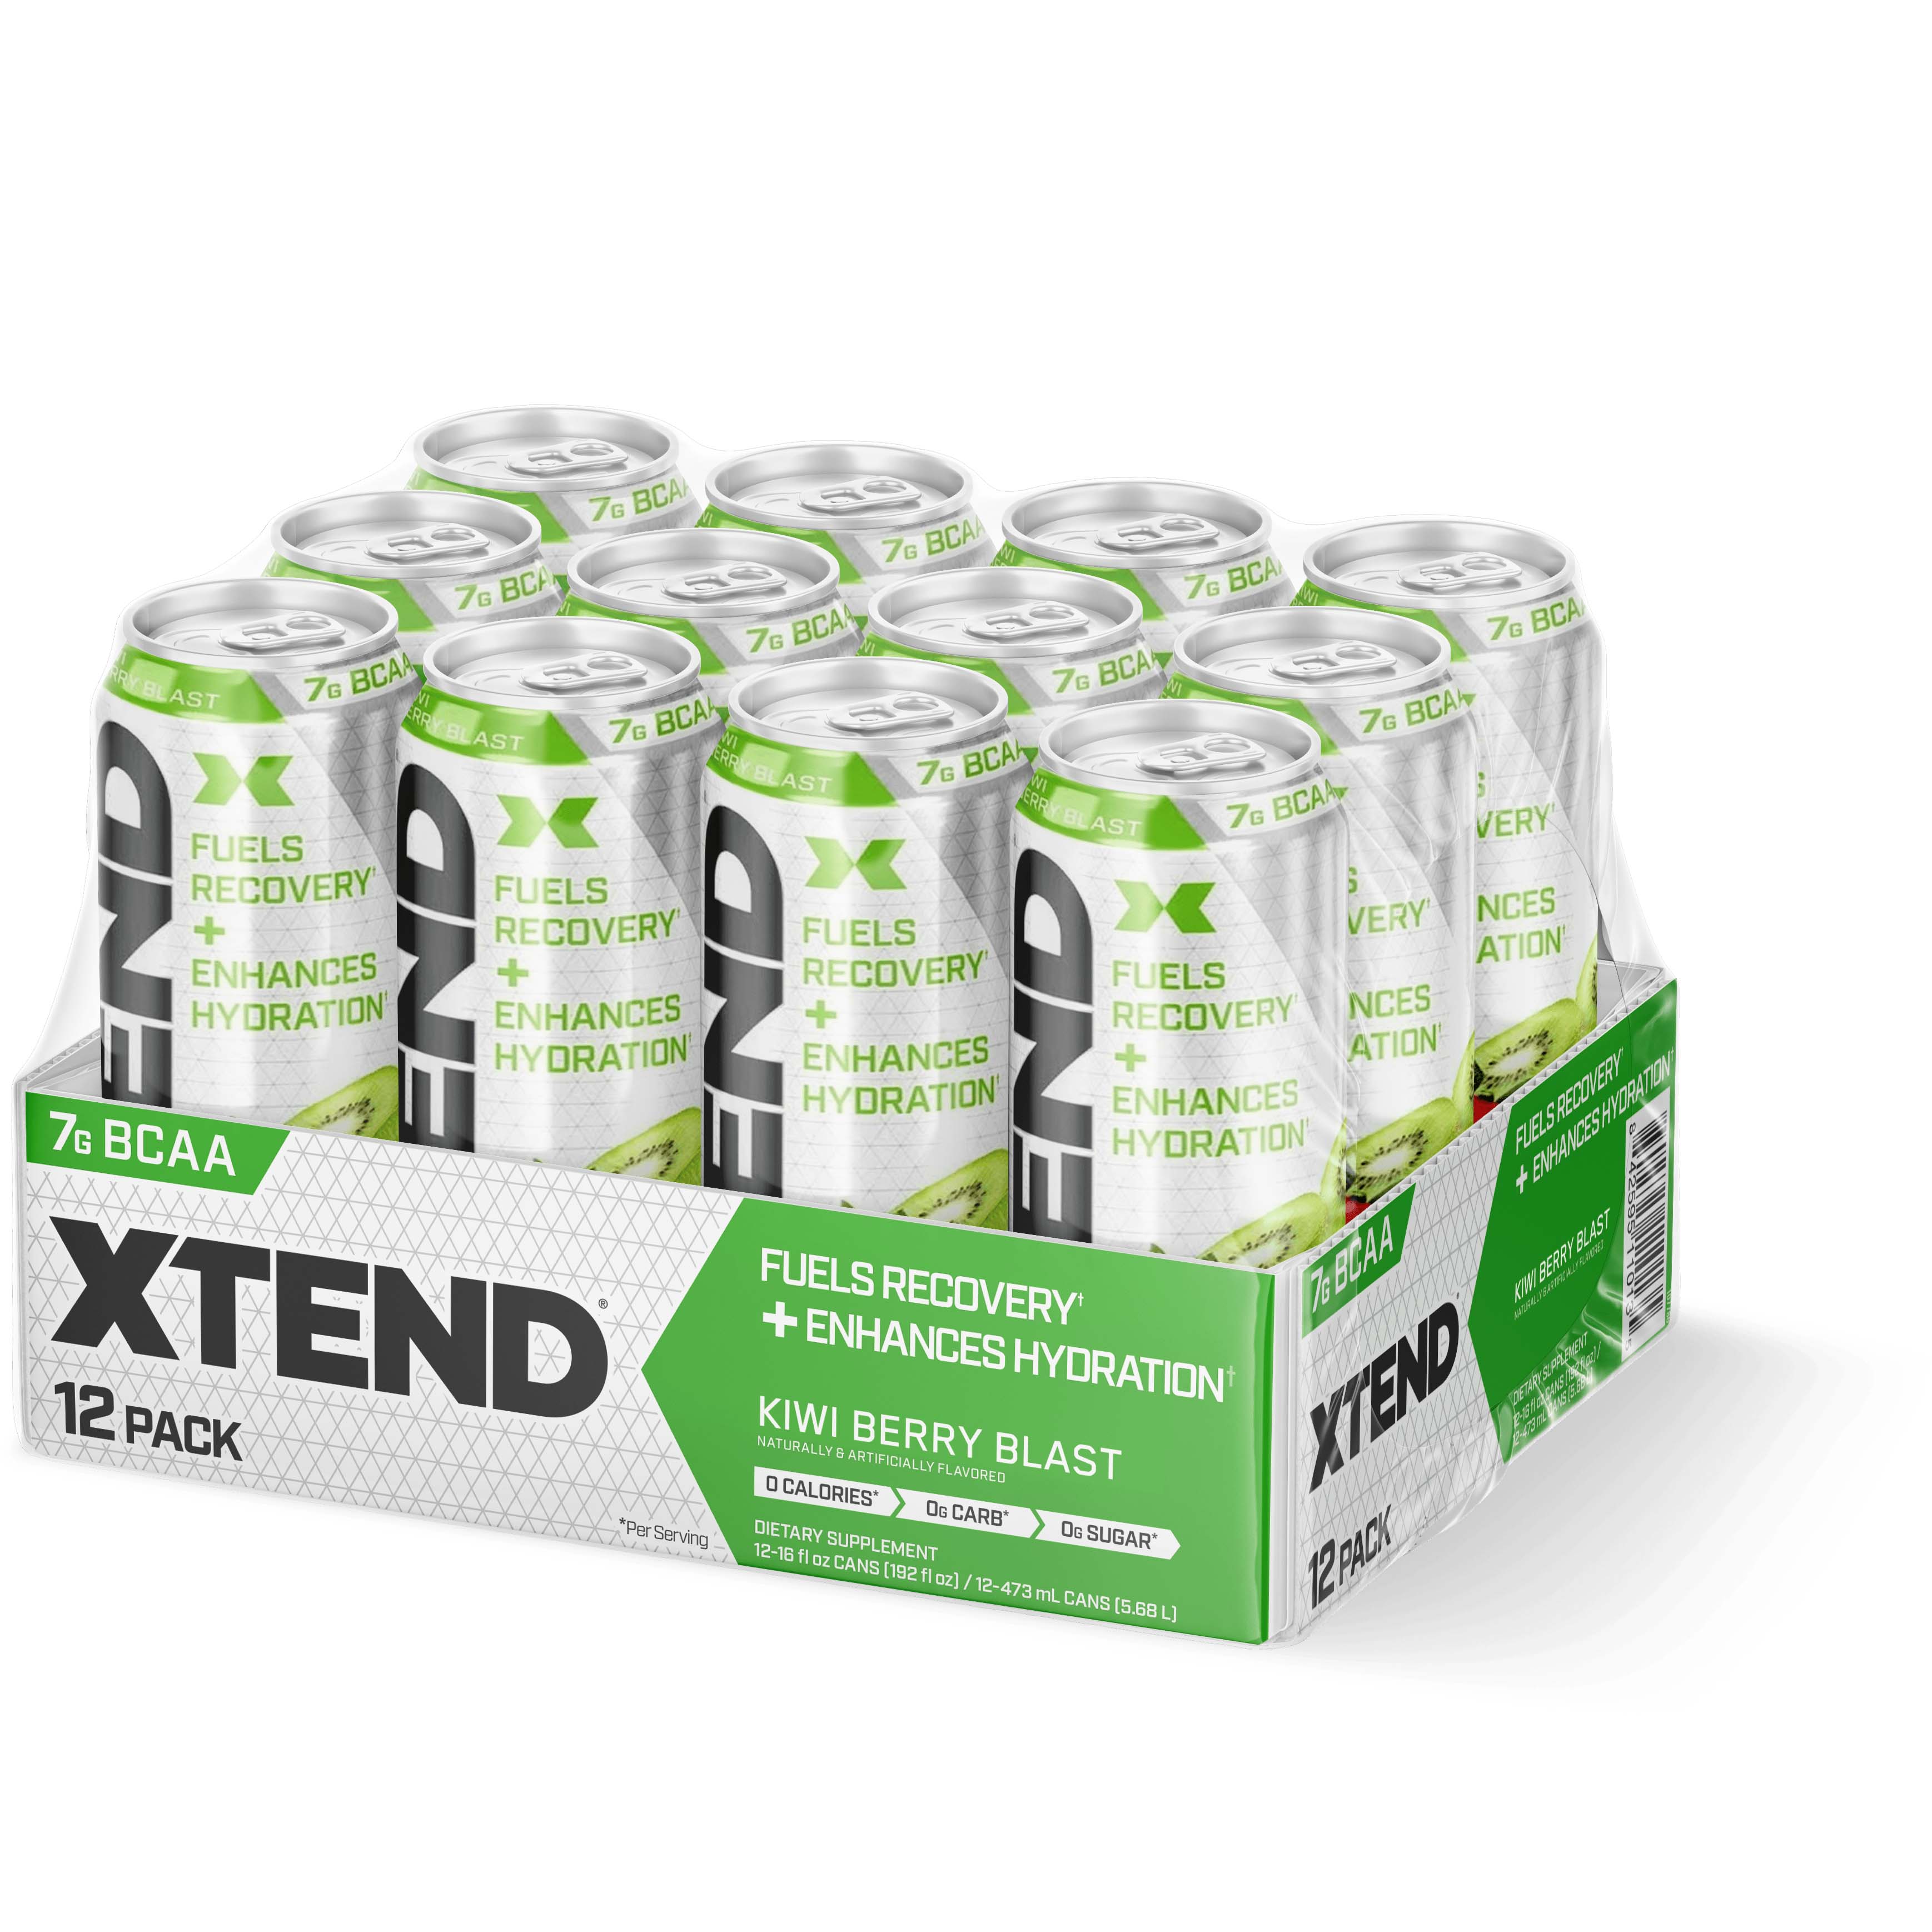 Xtend Carbonated Zero Sugar Hydration & Recovery Drink, Kiwi Berry Blast, Box of 12 Pieces